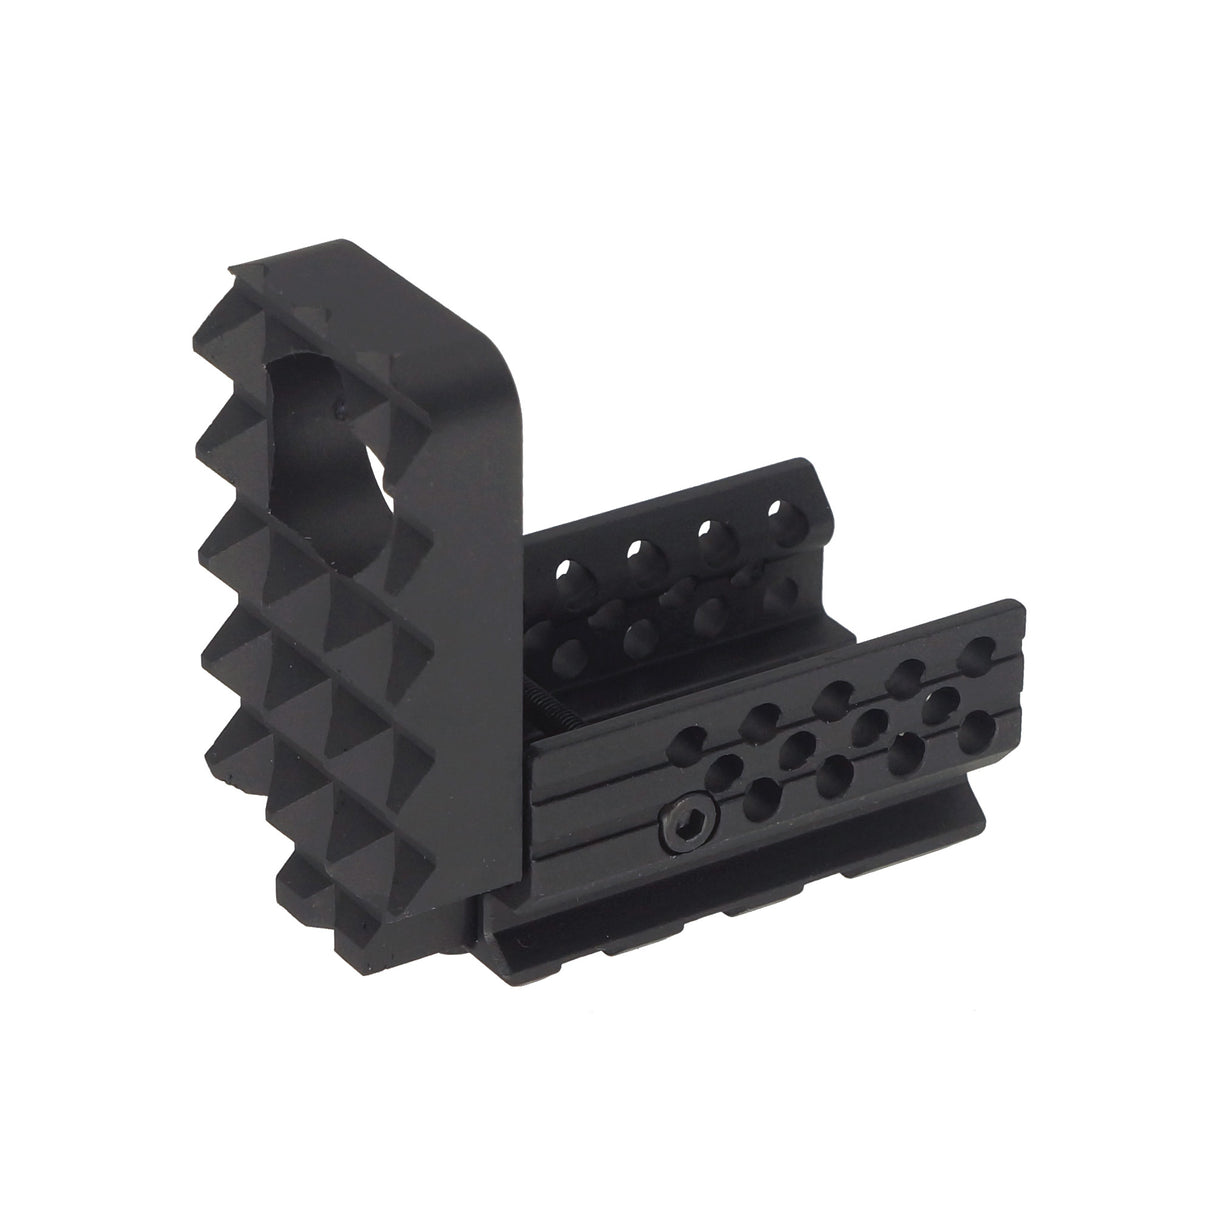 5KU Strike Face Front Tactical Kit for Marui / WE G19 GBB ( GB-474 )